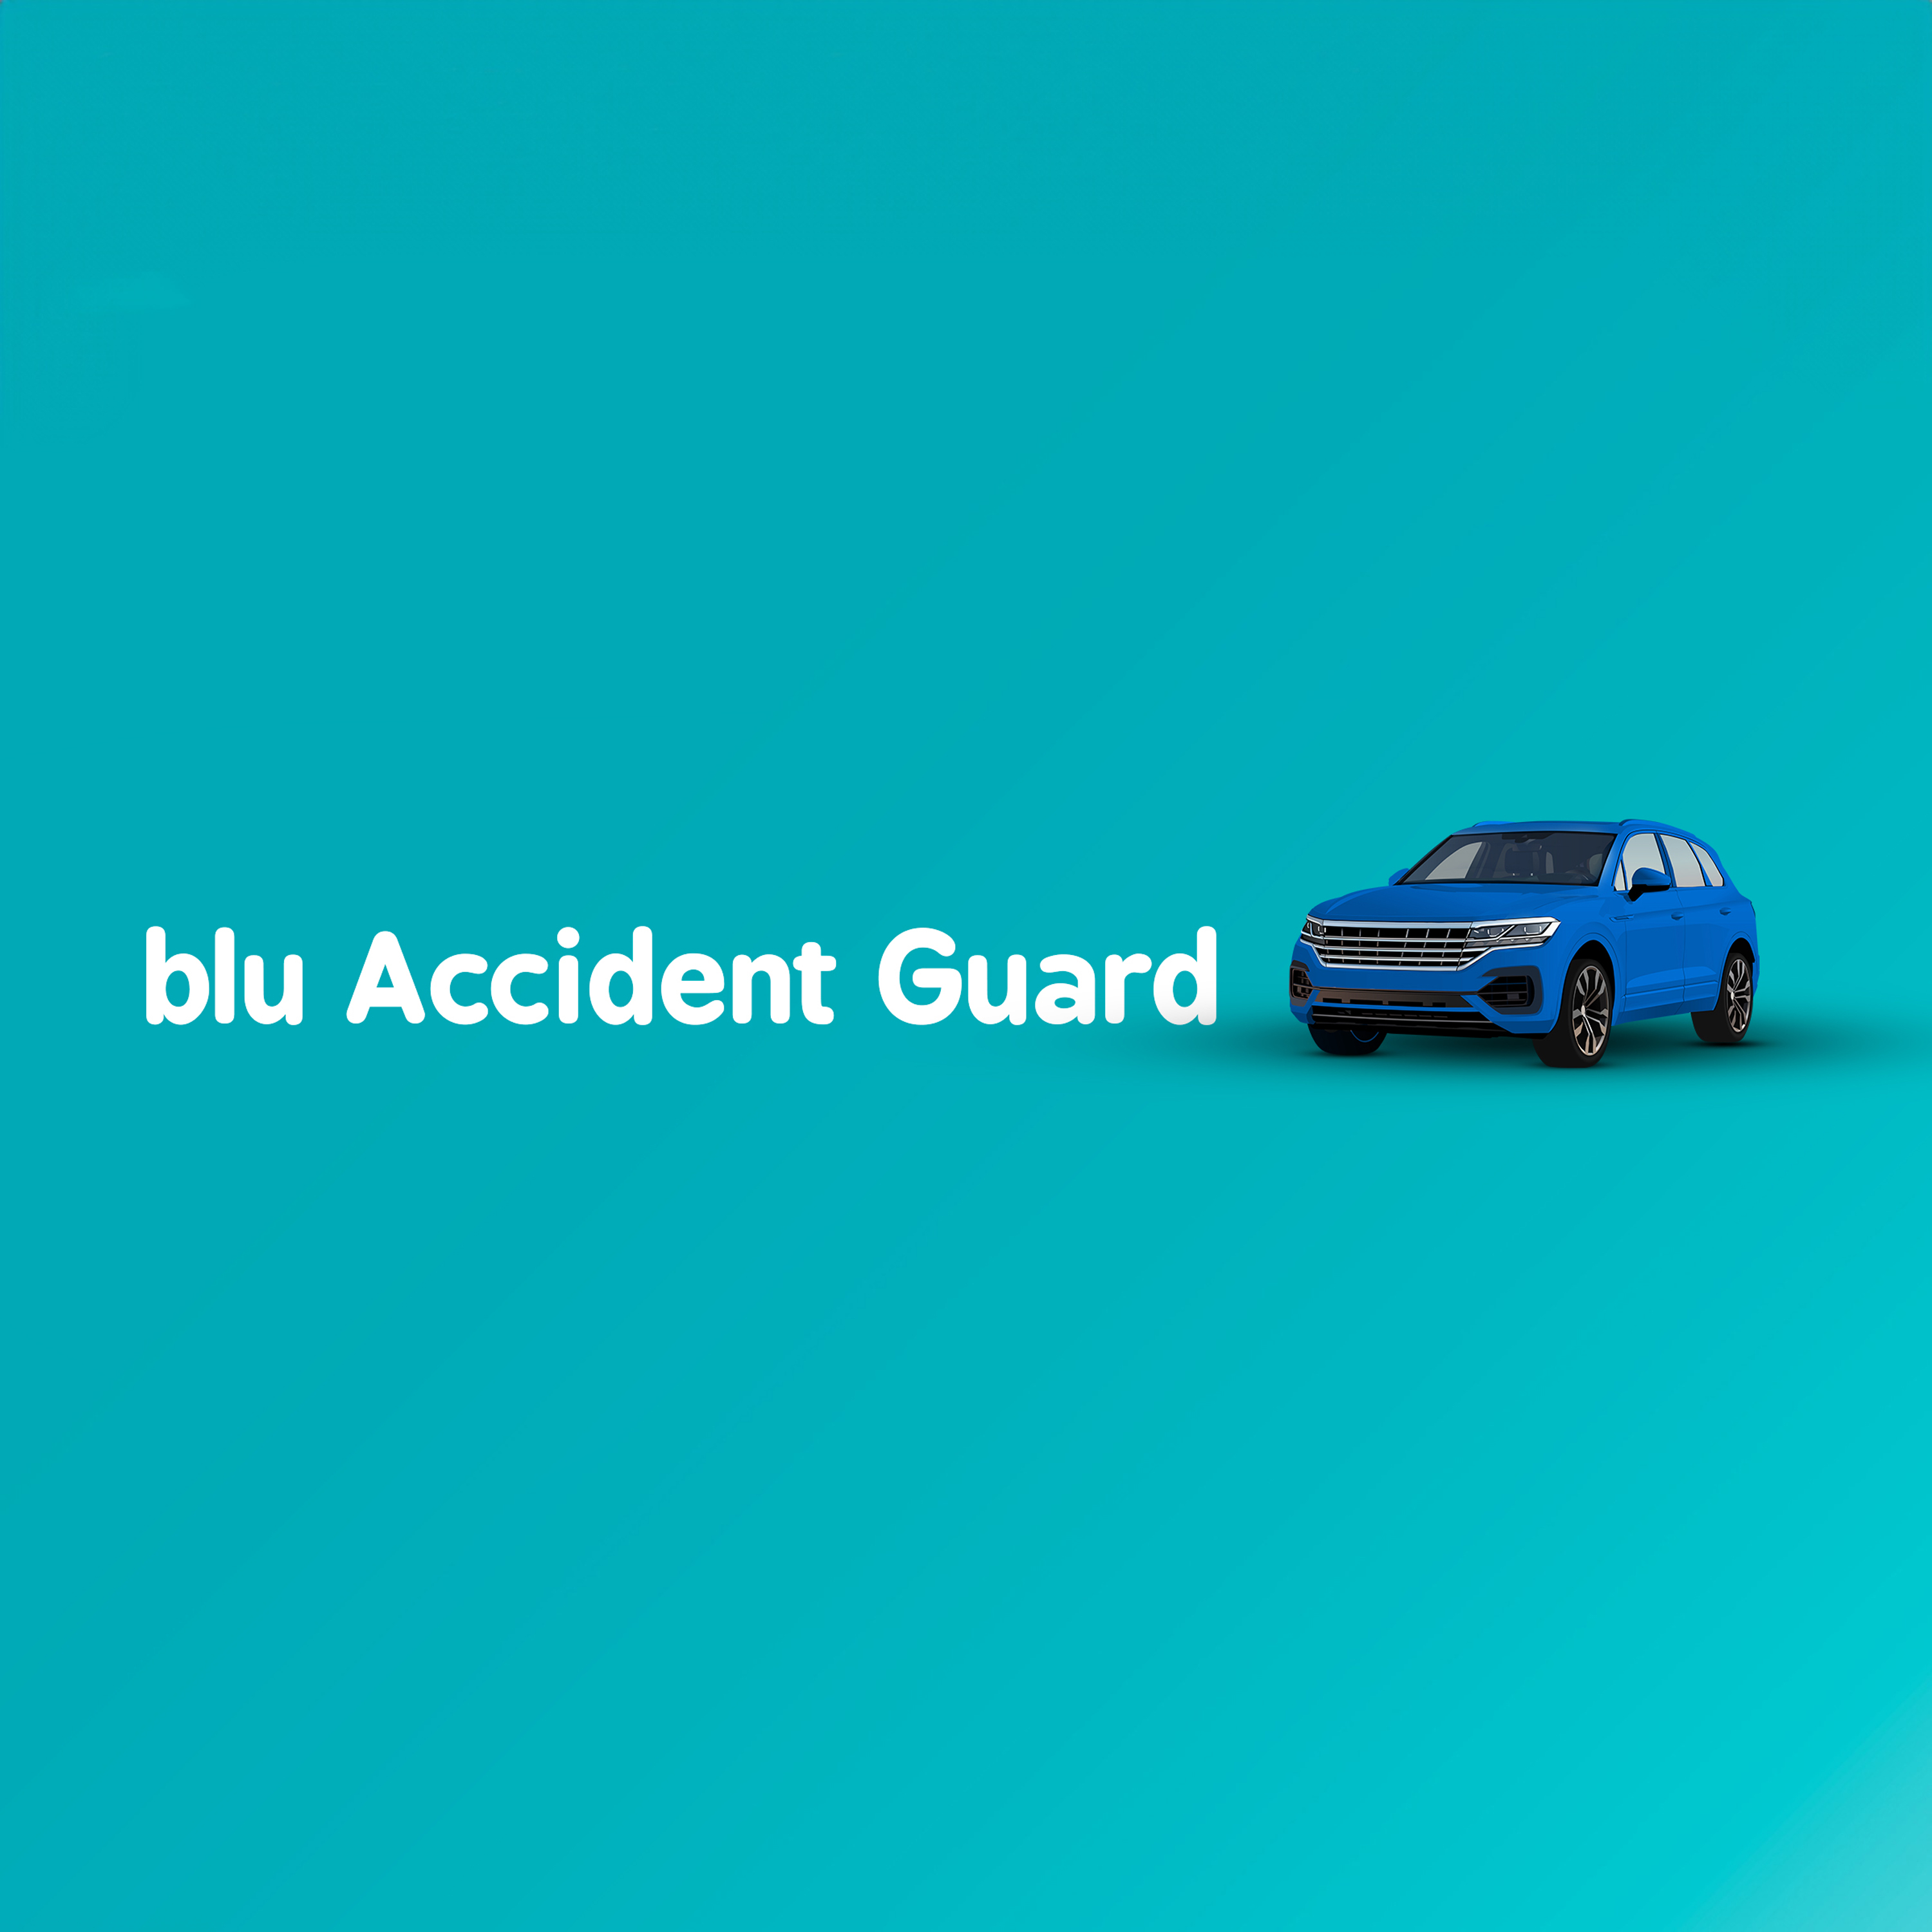 /product_details/blu-accident-guard-1691469024.jpg